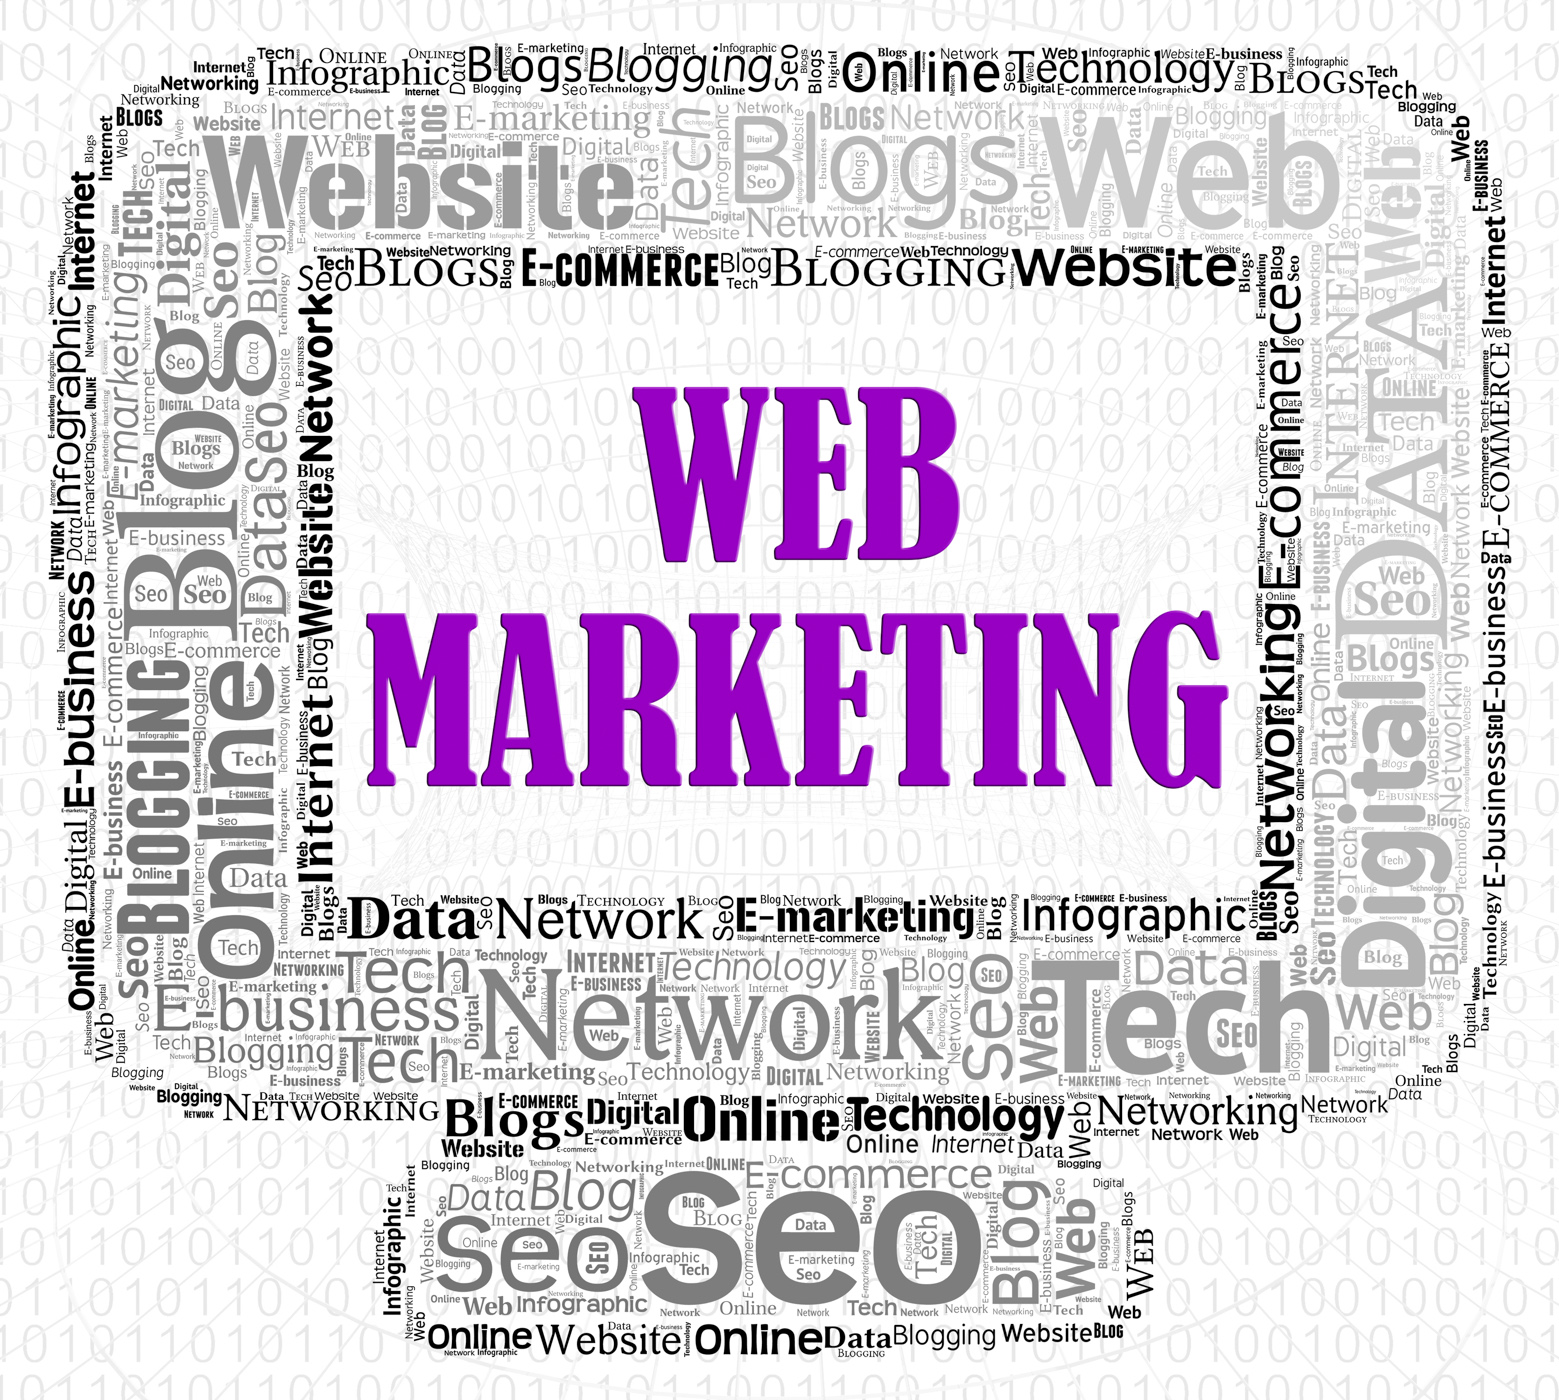 Web marketing represents search engine and advertising photo